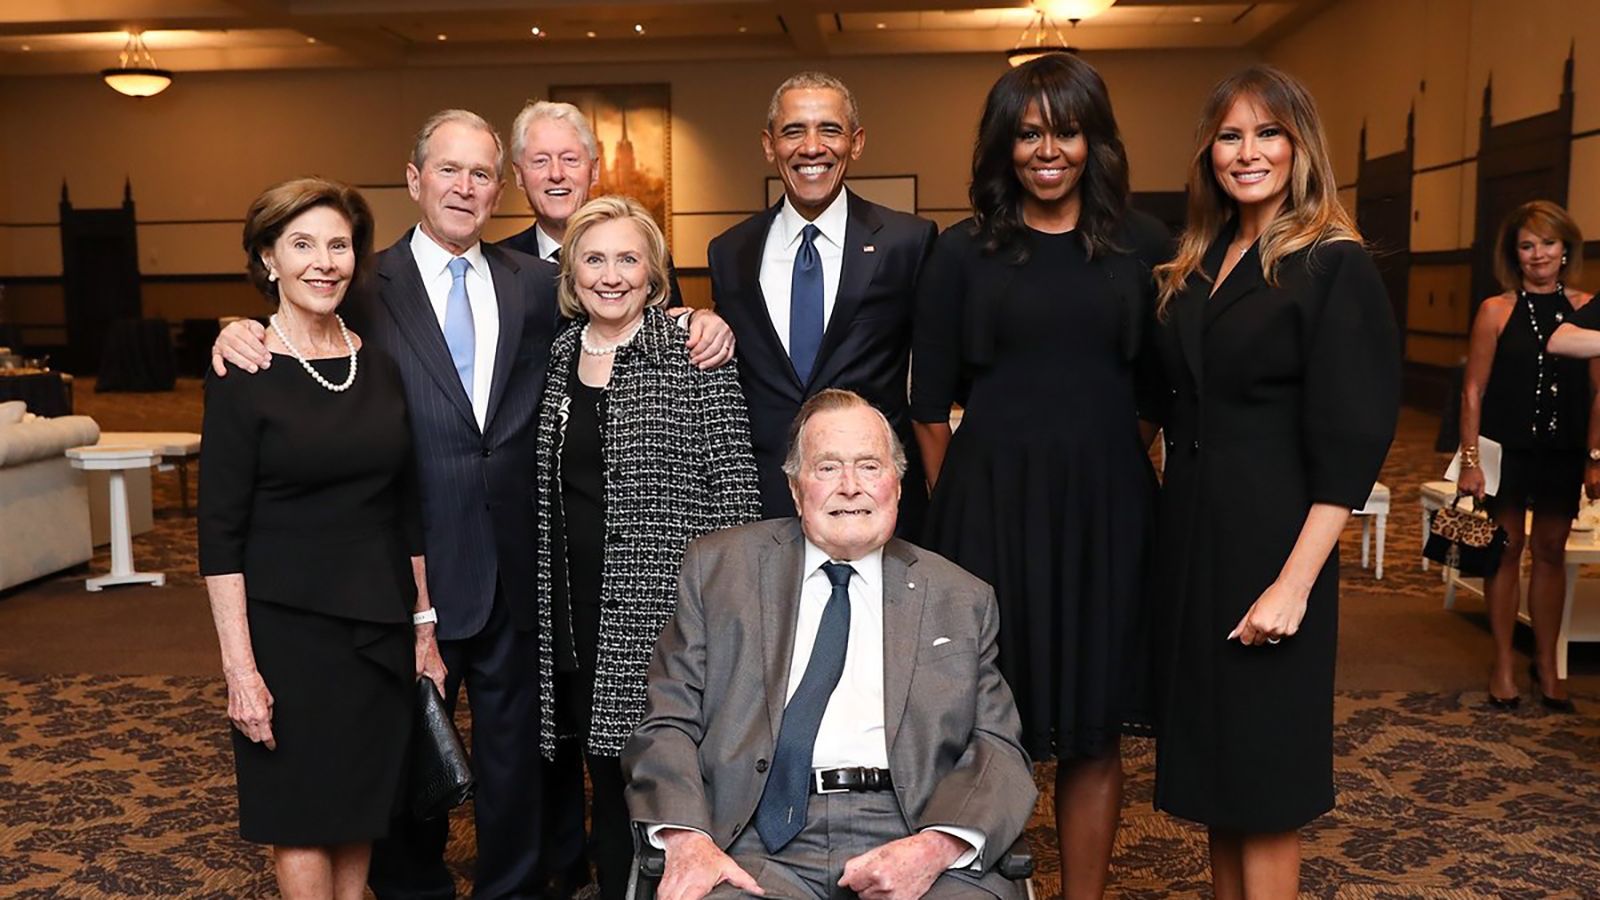 The story behind that viral photo of the past 4 presidents all in one place